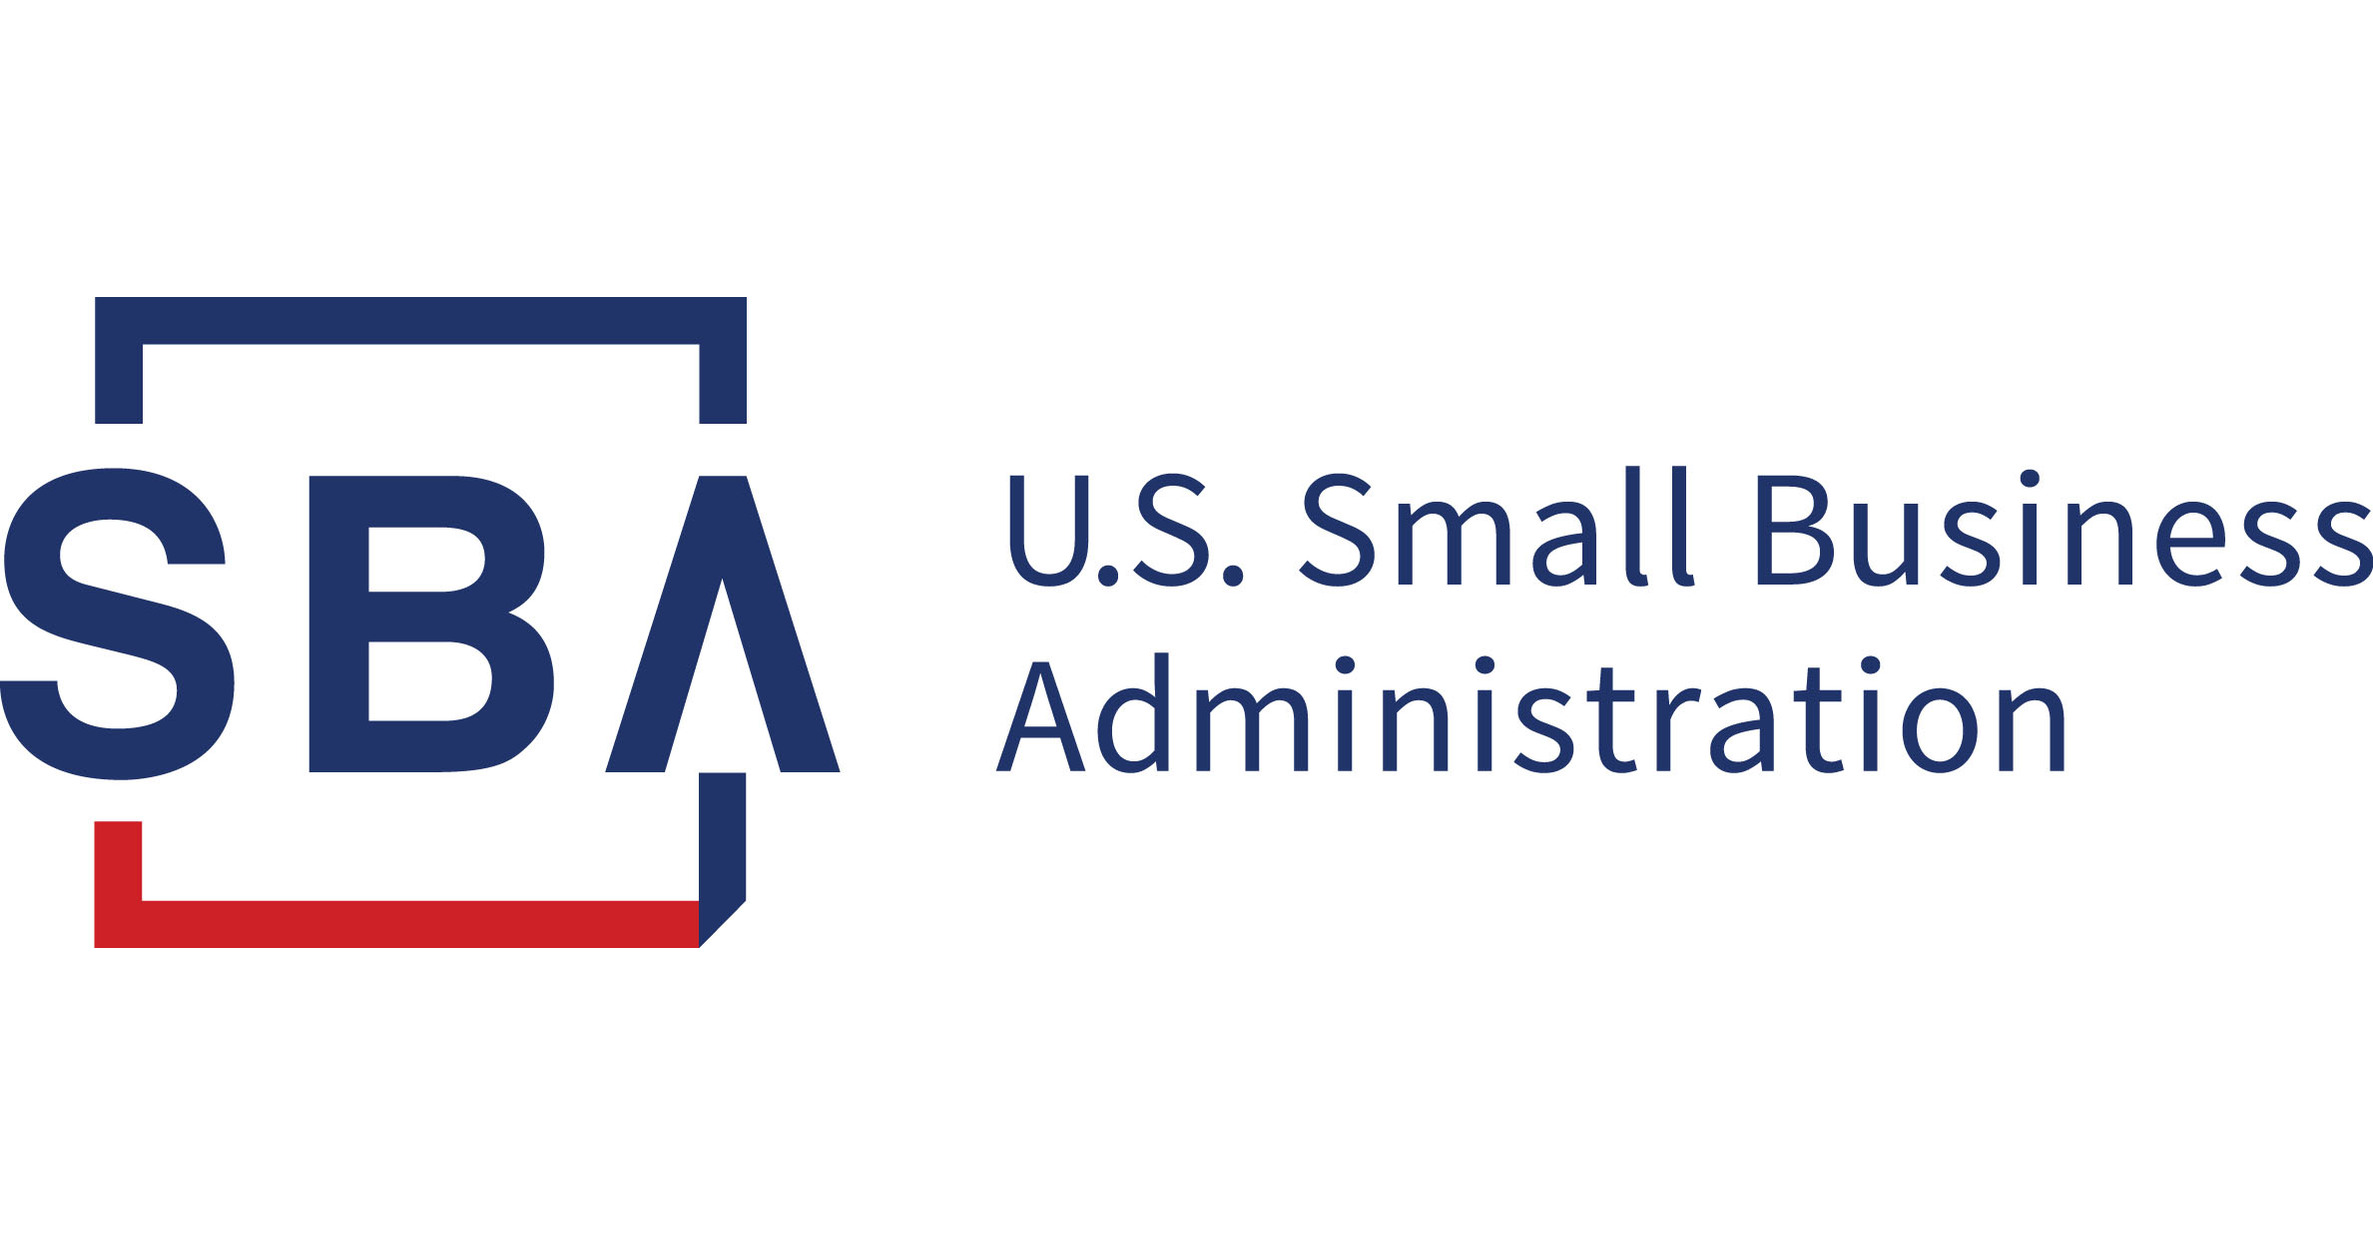 Image for Small Business Facts: Small Business Innovation Measured by Patenting Activity